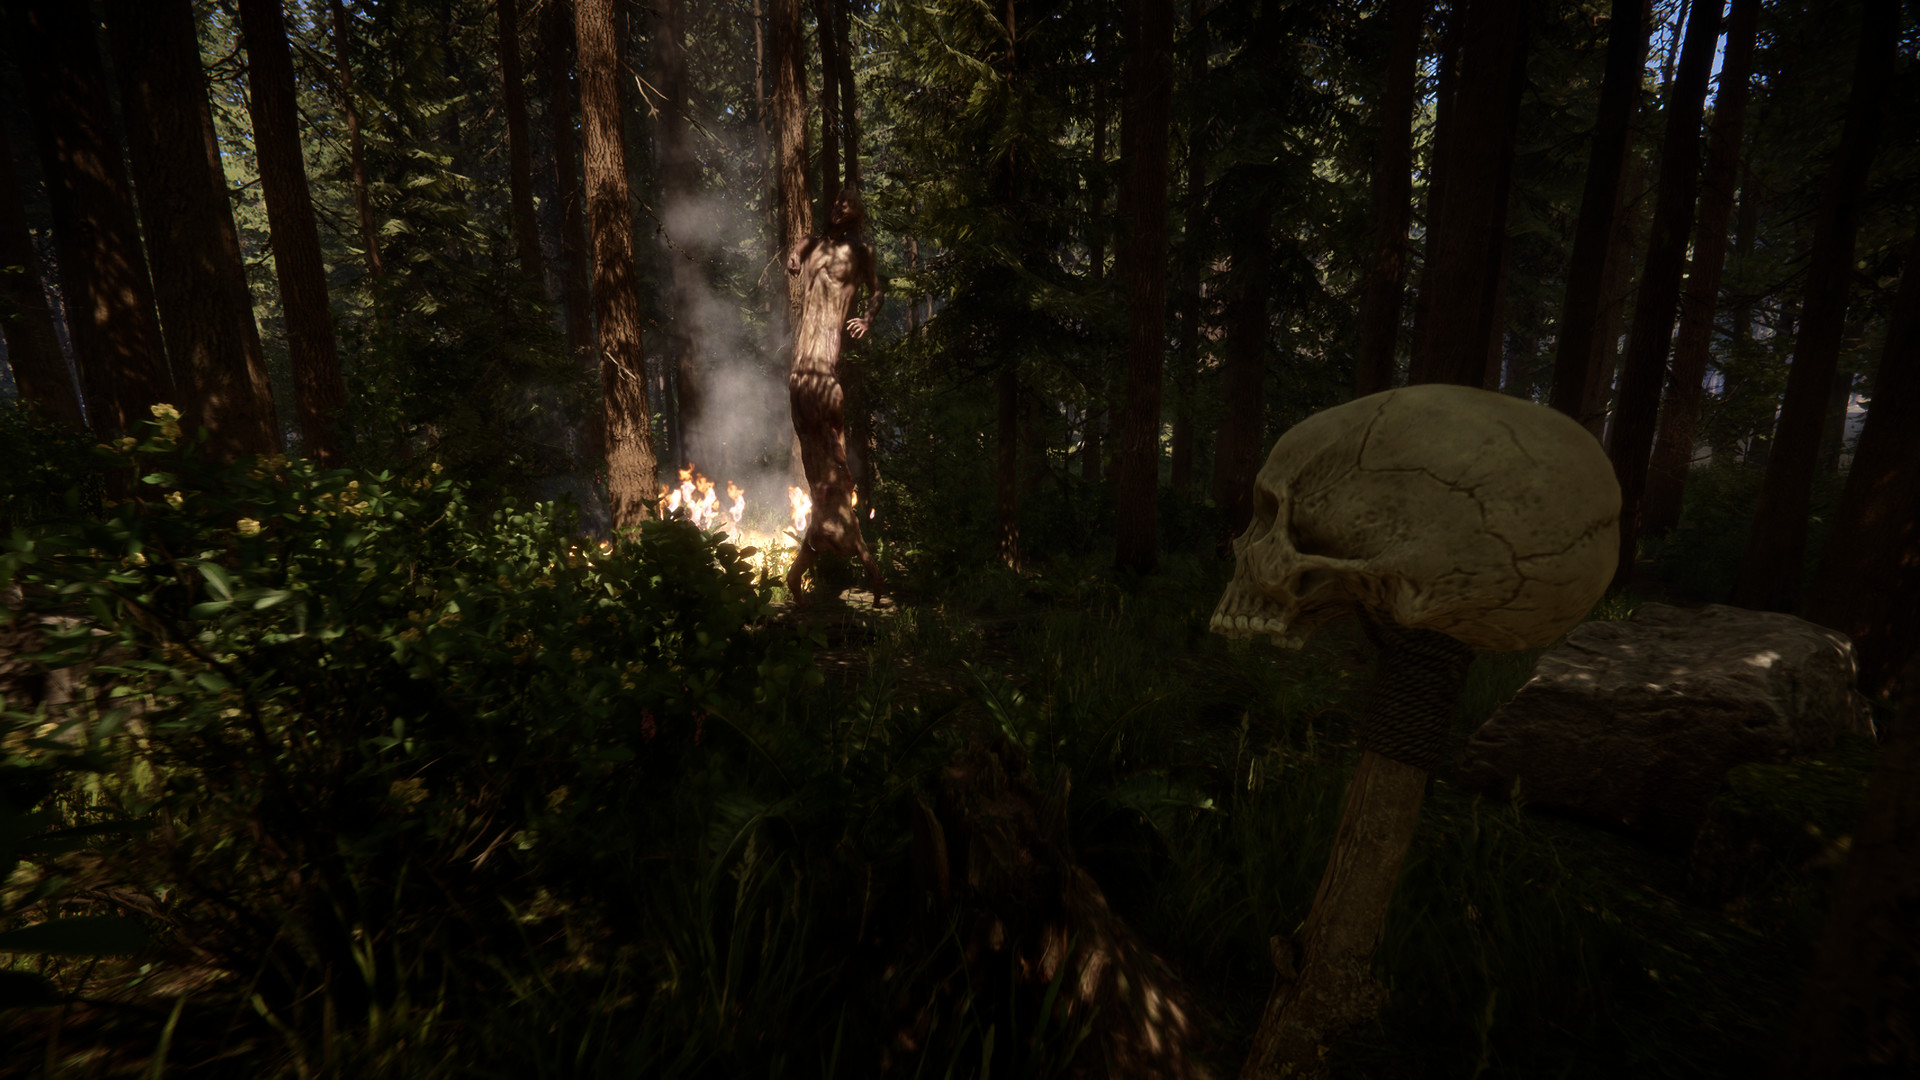 Sons Of The Forest ya disponible en Steam Early Access - Requisitos de PC y  Trailer del Multiplayer